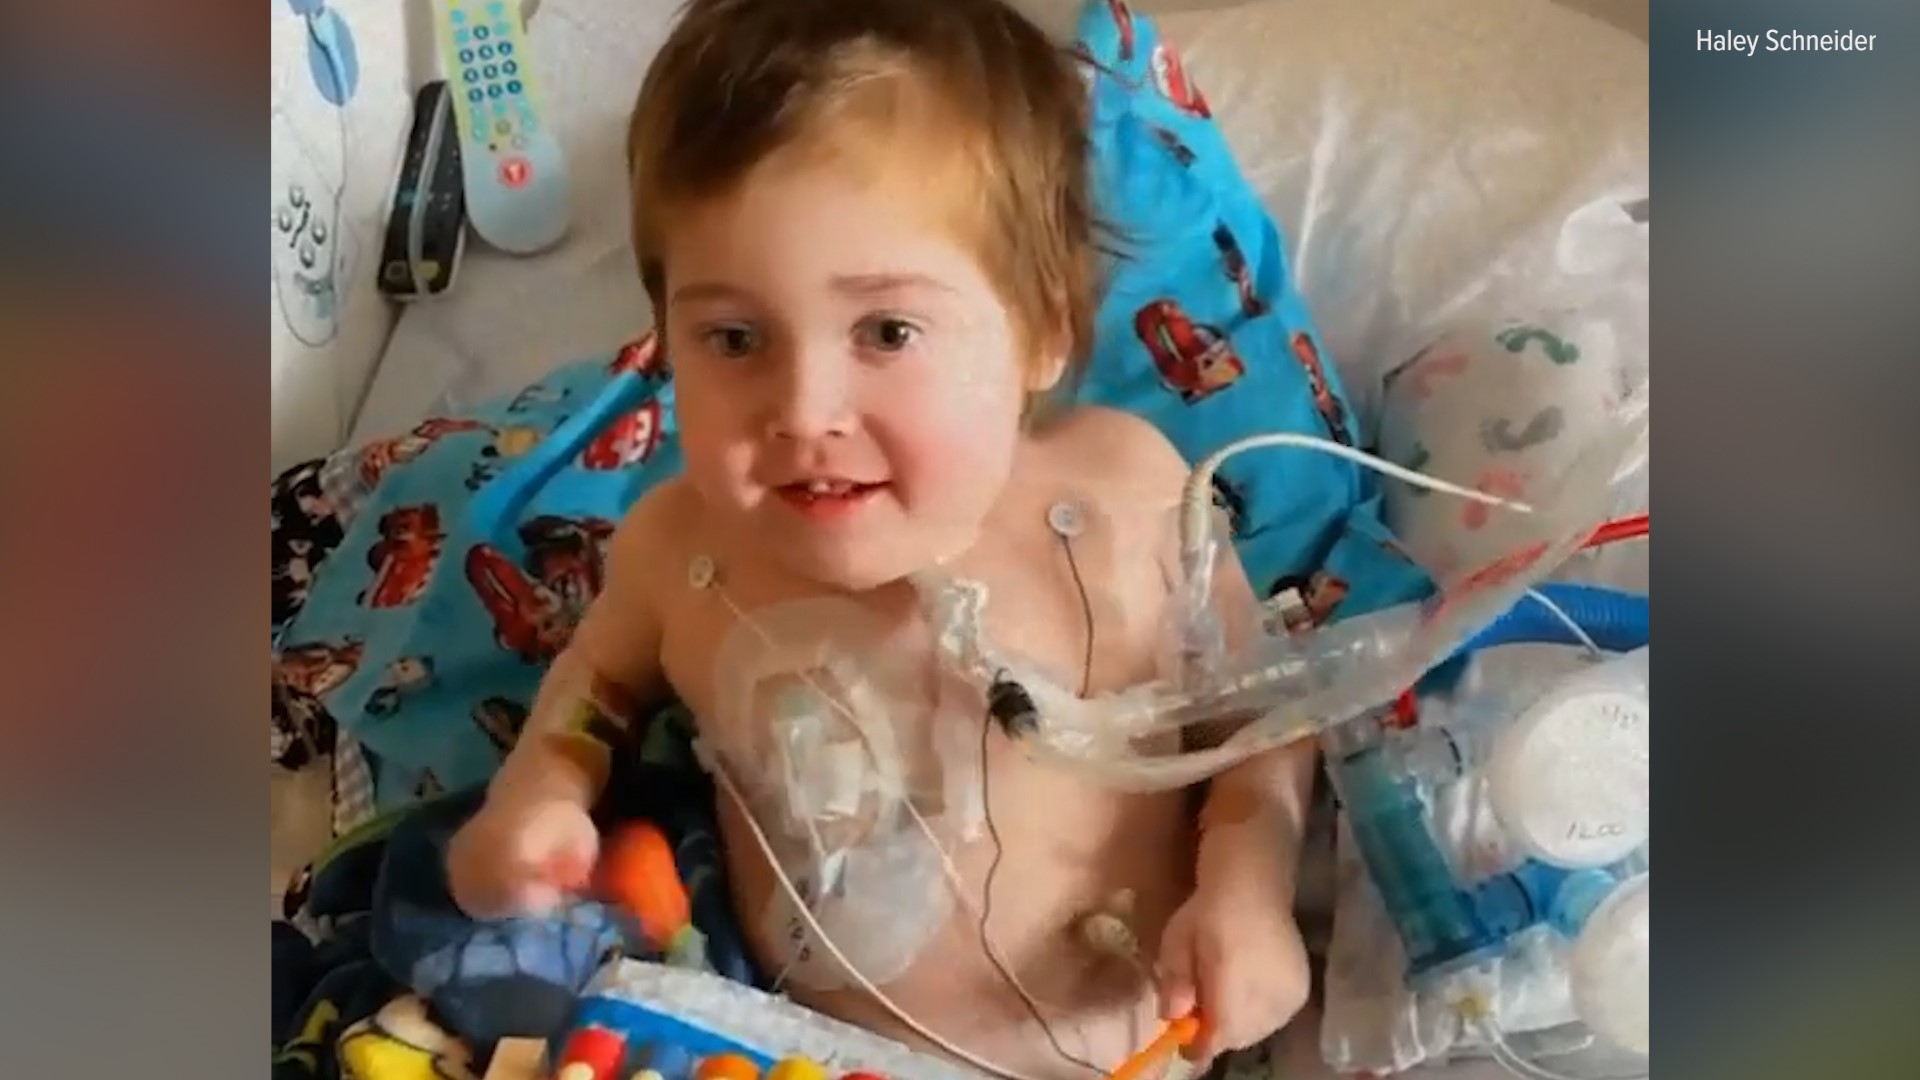 5-year-old Noah Schnieder has been battling cystic fibrosis since he was born. His mother was prepared for the worst when he got COVID-19.